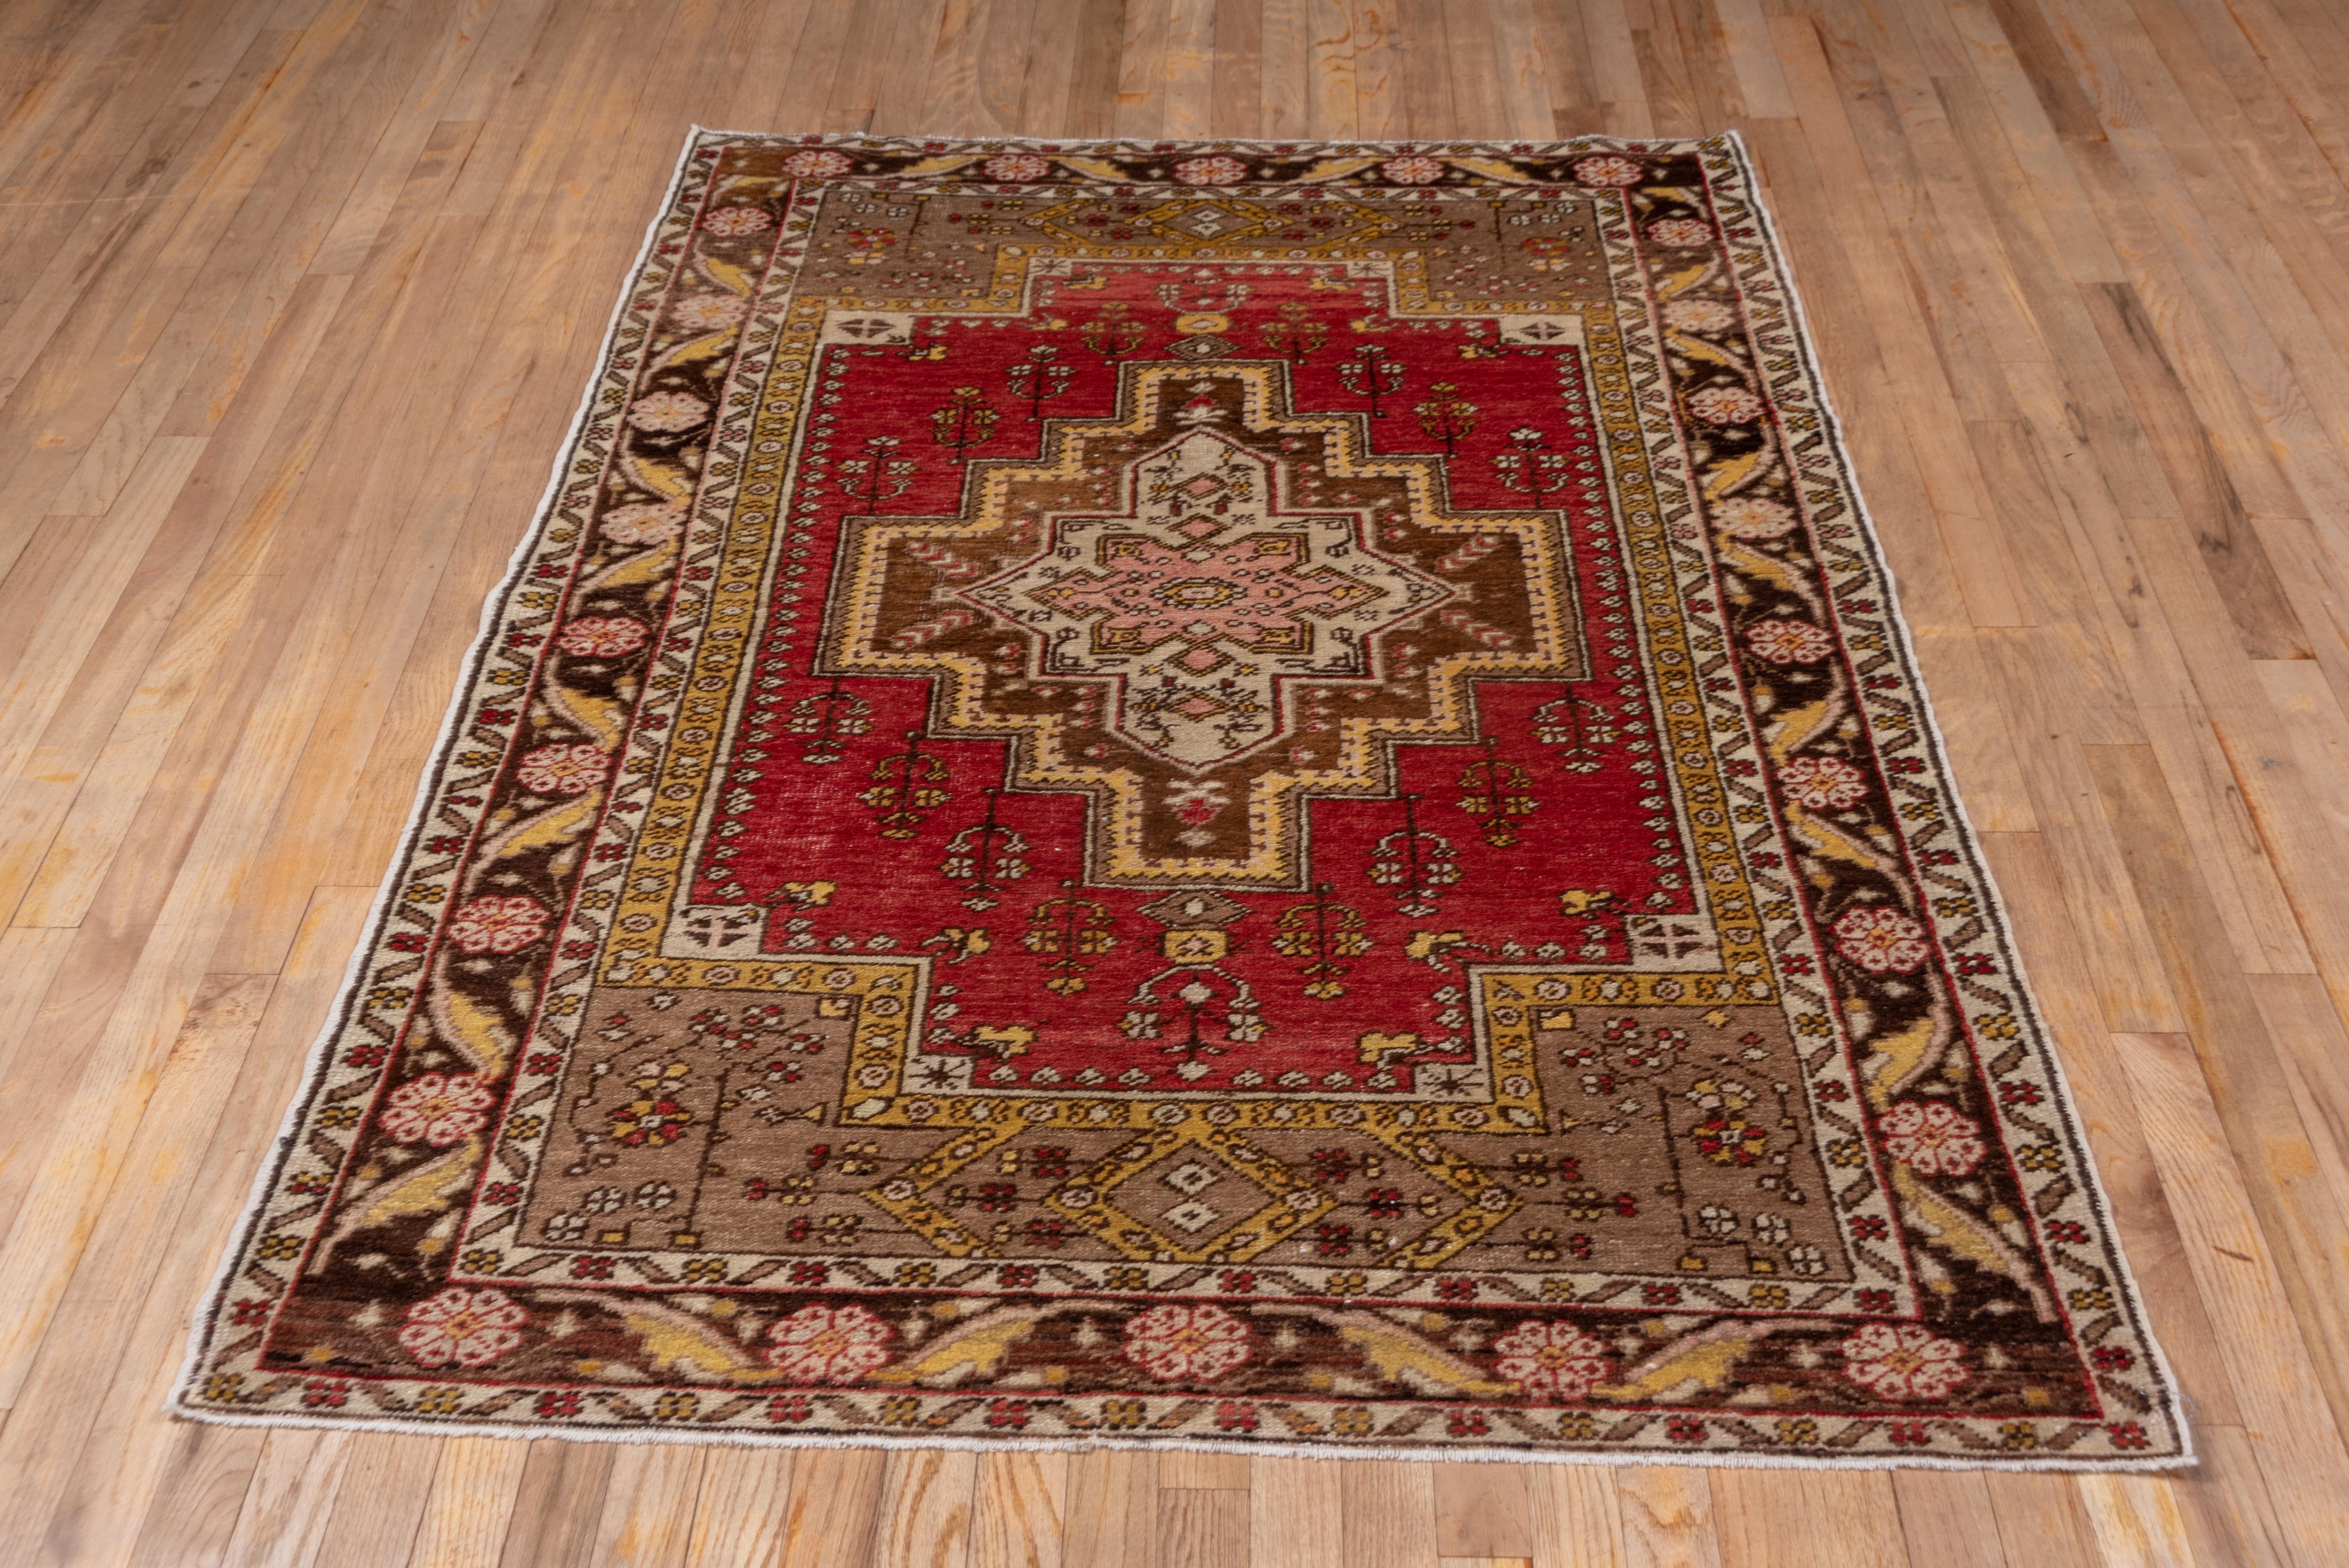 This good condition Turkish village scatter shows a tomato red stepped subfield centered by an ivory octogramme sub-medallion surrounded by an ivory stepped square-ended surround. The green spandrels show rosette flowers and the abrashed brick